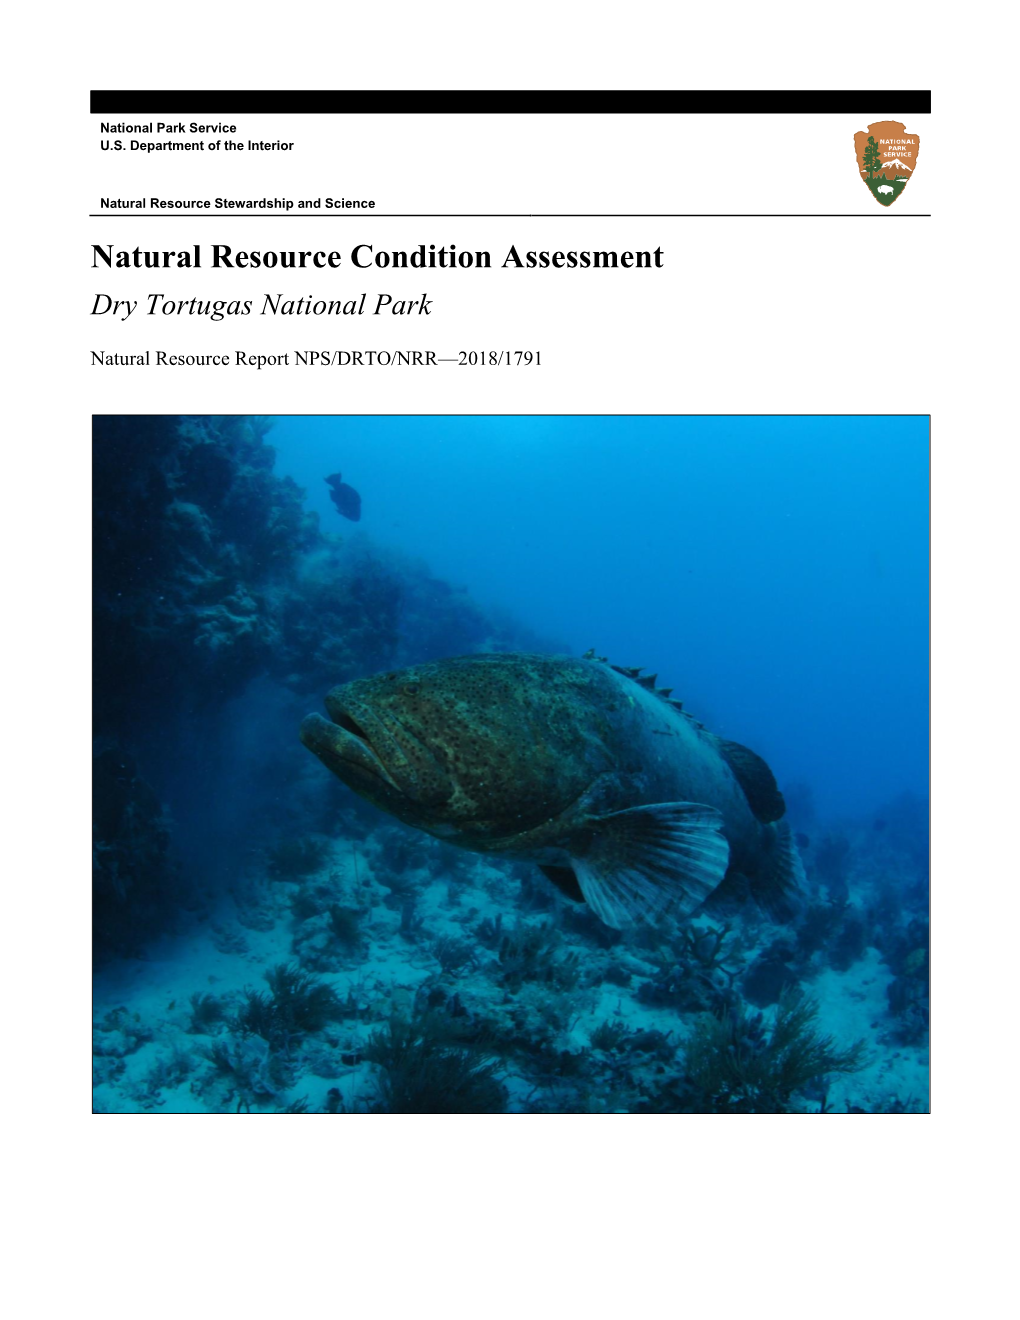 Natural Resource Condition Assessment: Dry Tortugas National Park